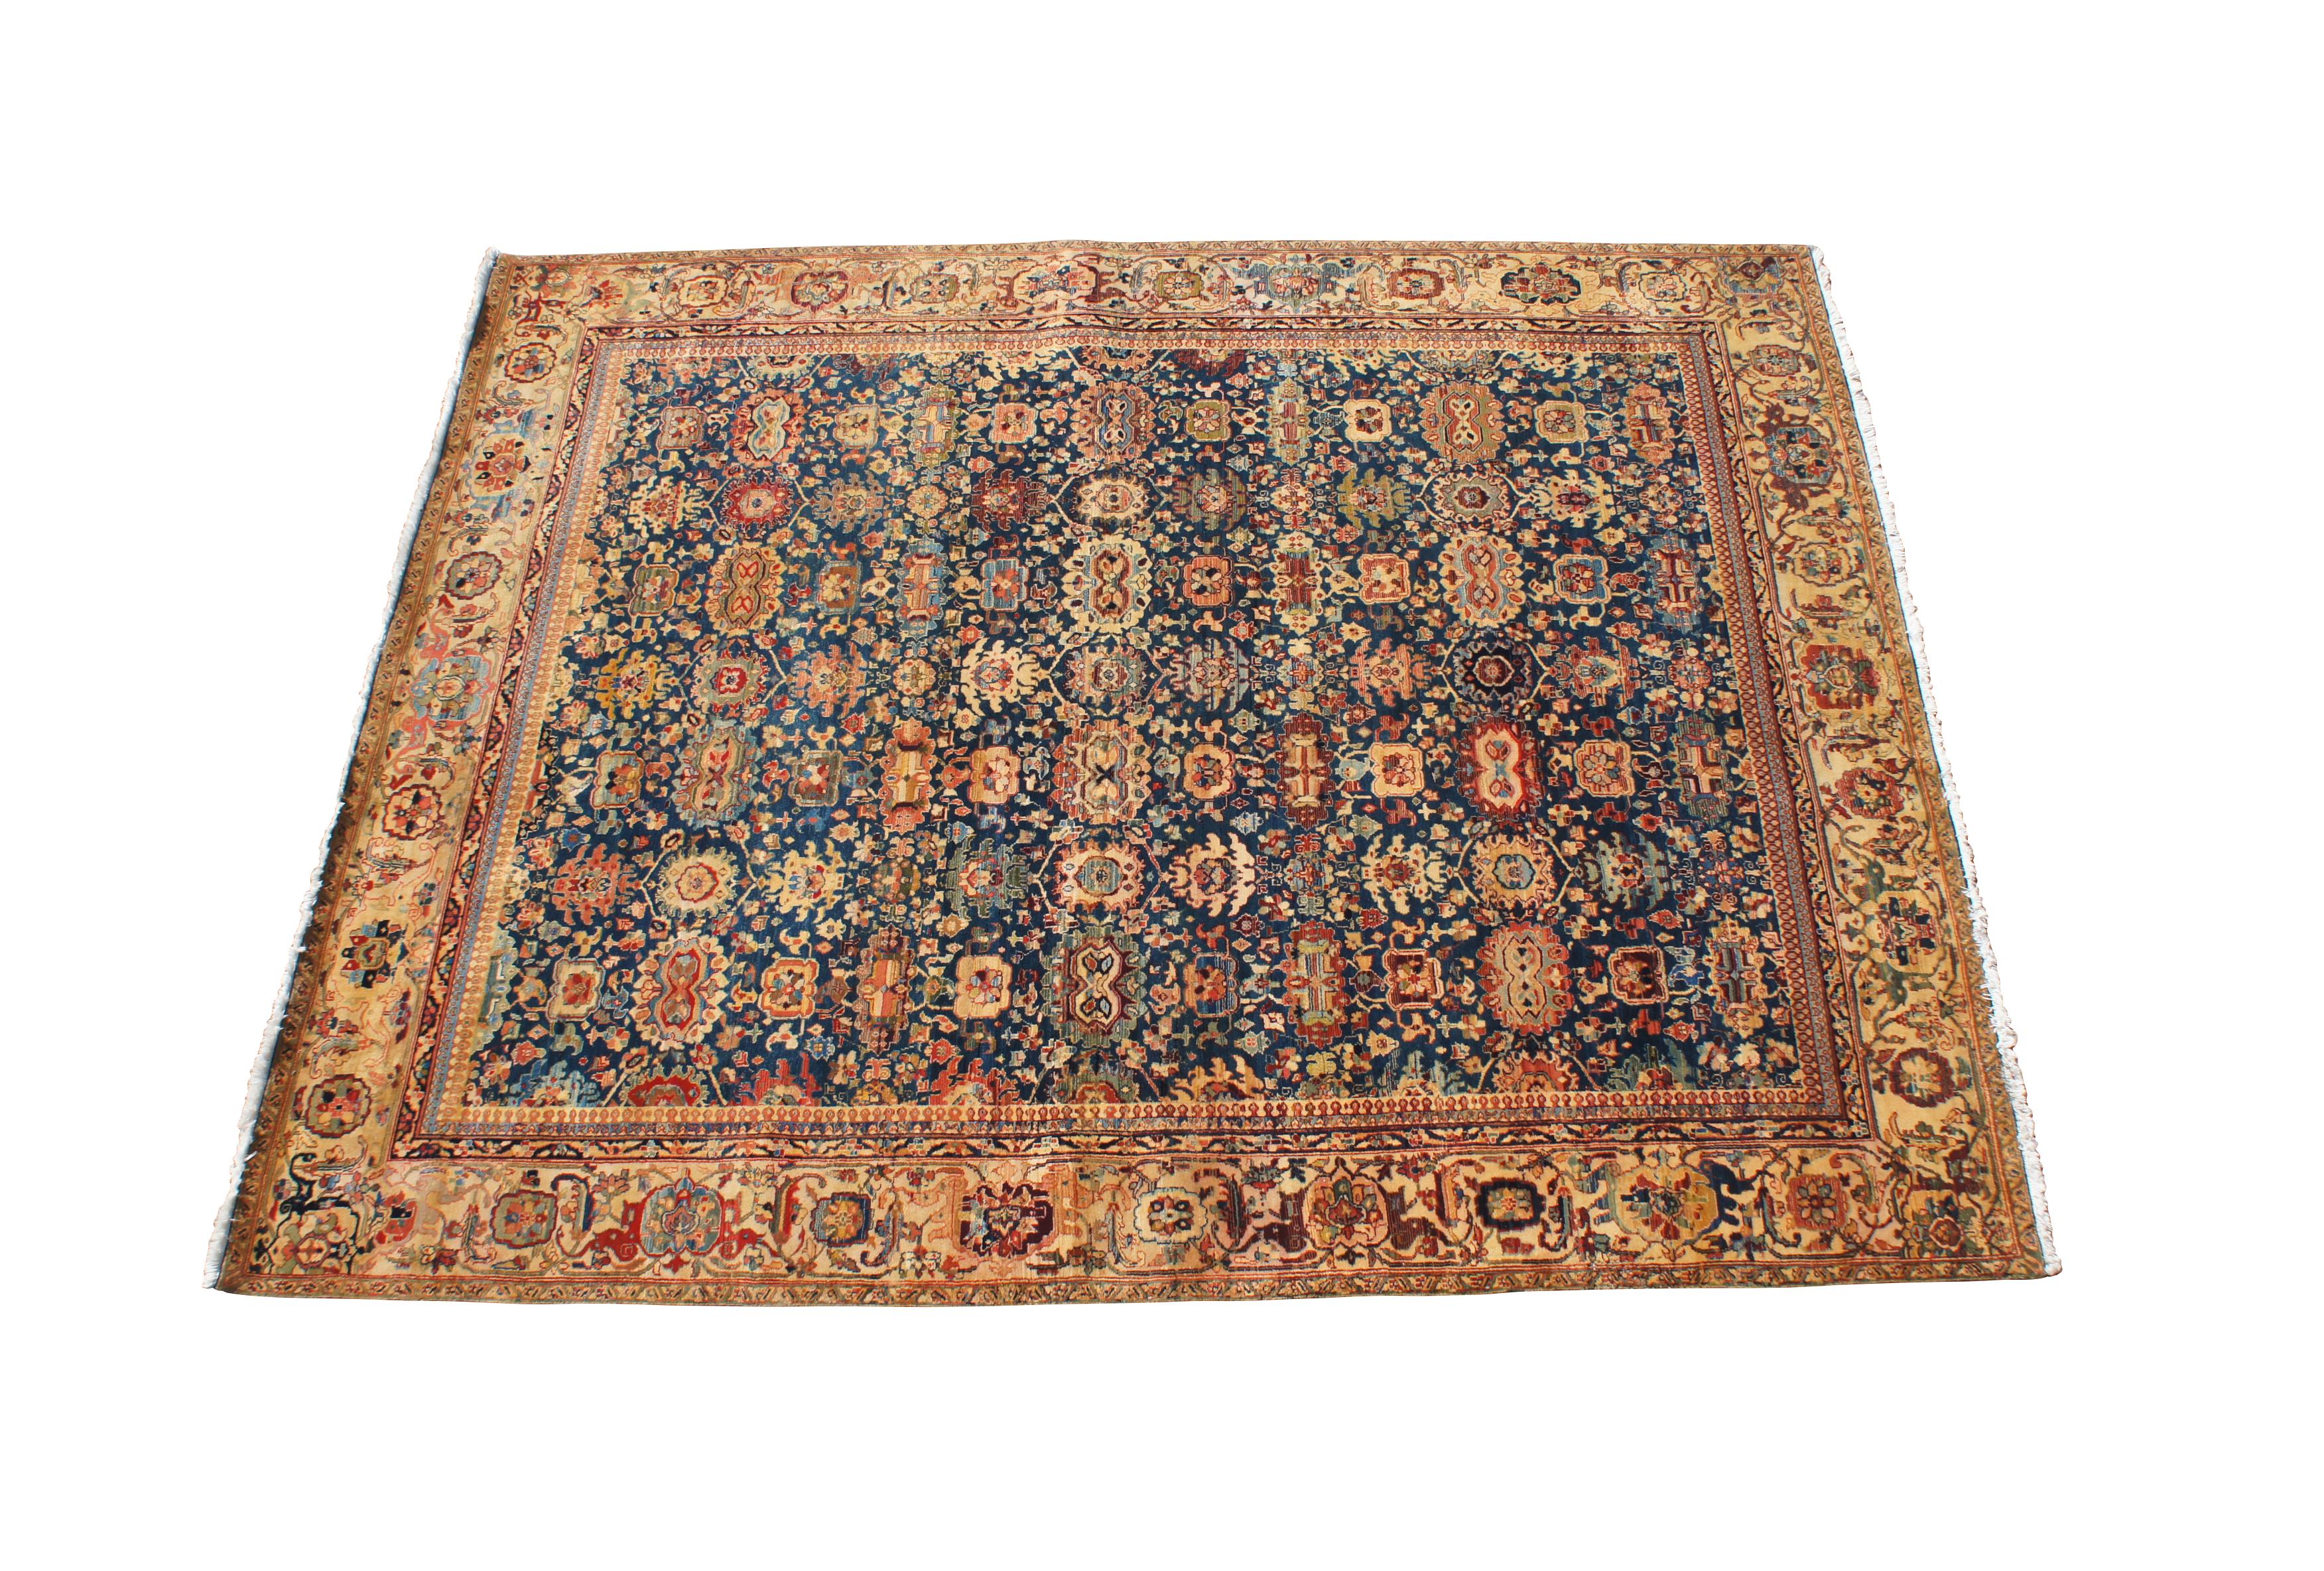 Genuine hand knotted oriental area rug.  Features a colorful blue and gold geometric design.  Hand woven from wool, 144kpsi

Persian Bijar rugs are hand-woven rugs that are known for their durability and resistance to dirt.  Bijar rugs are made